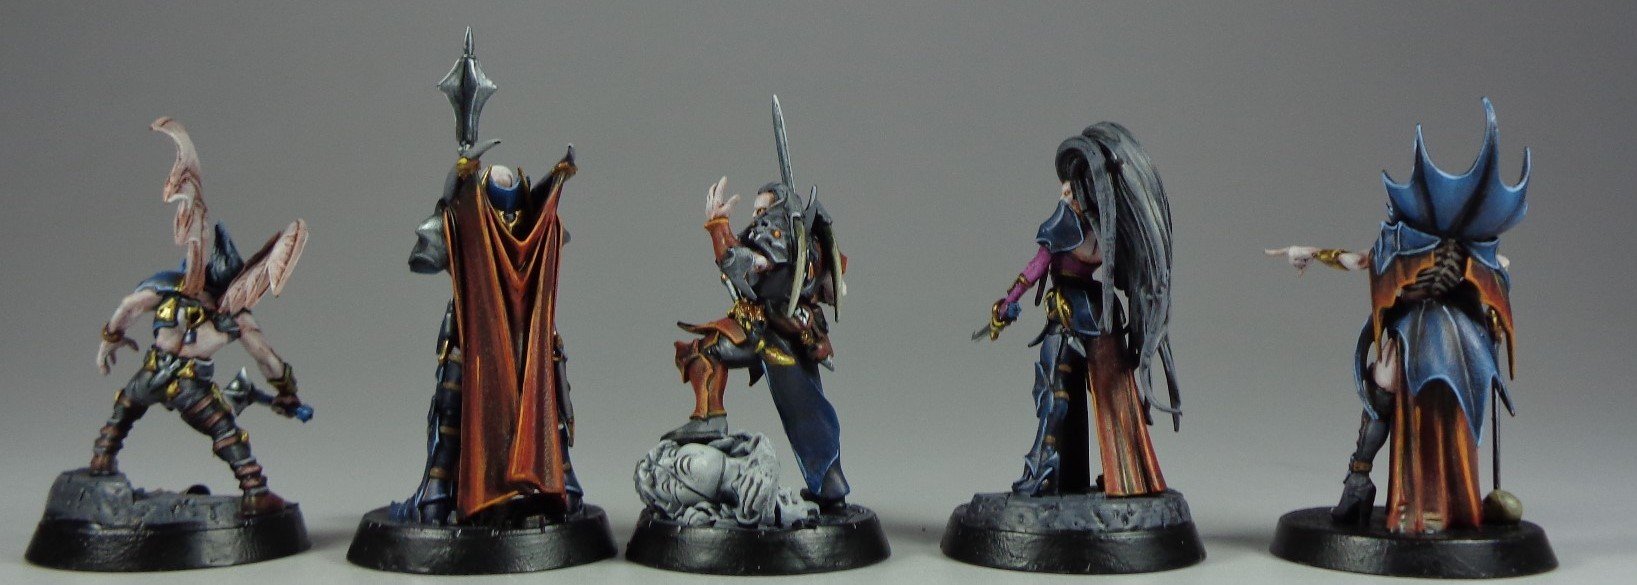 Soulblight Gravelords Miniature Painting Commission Paintedfigs (4).jpg